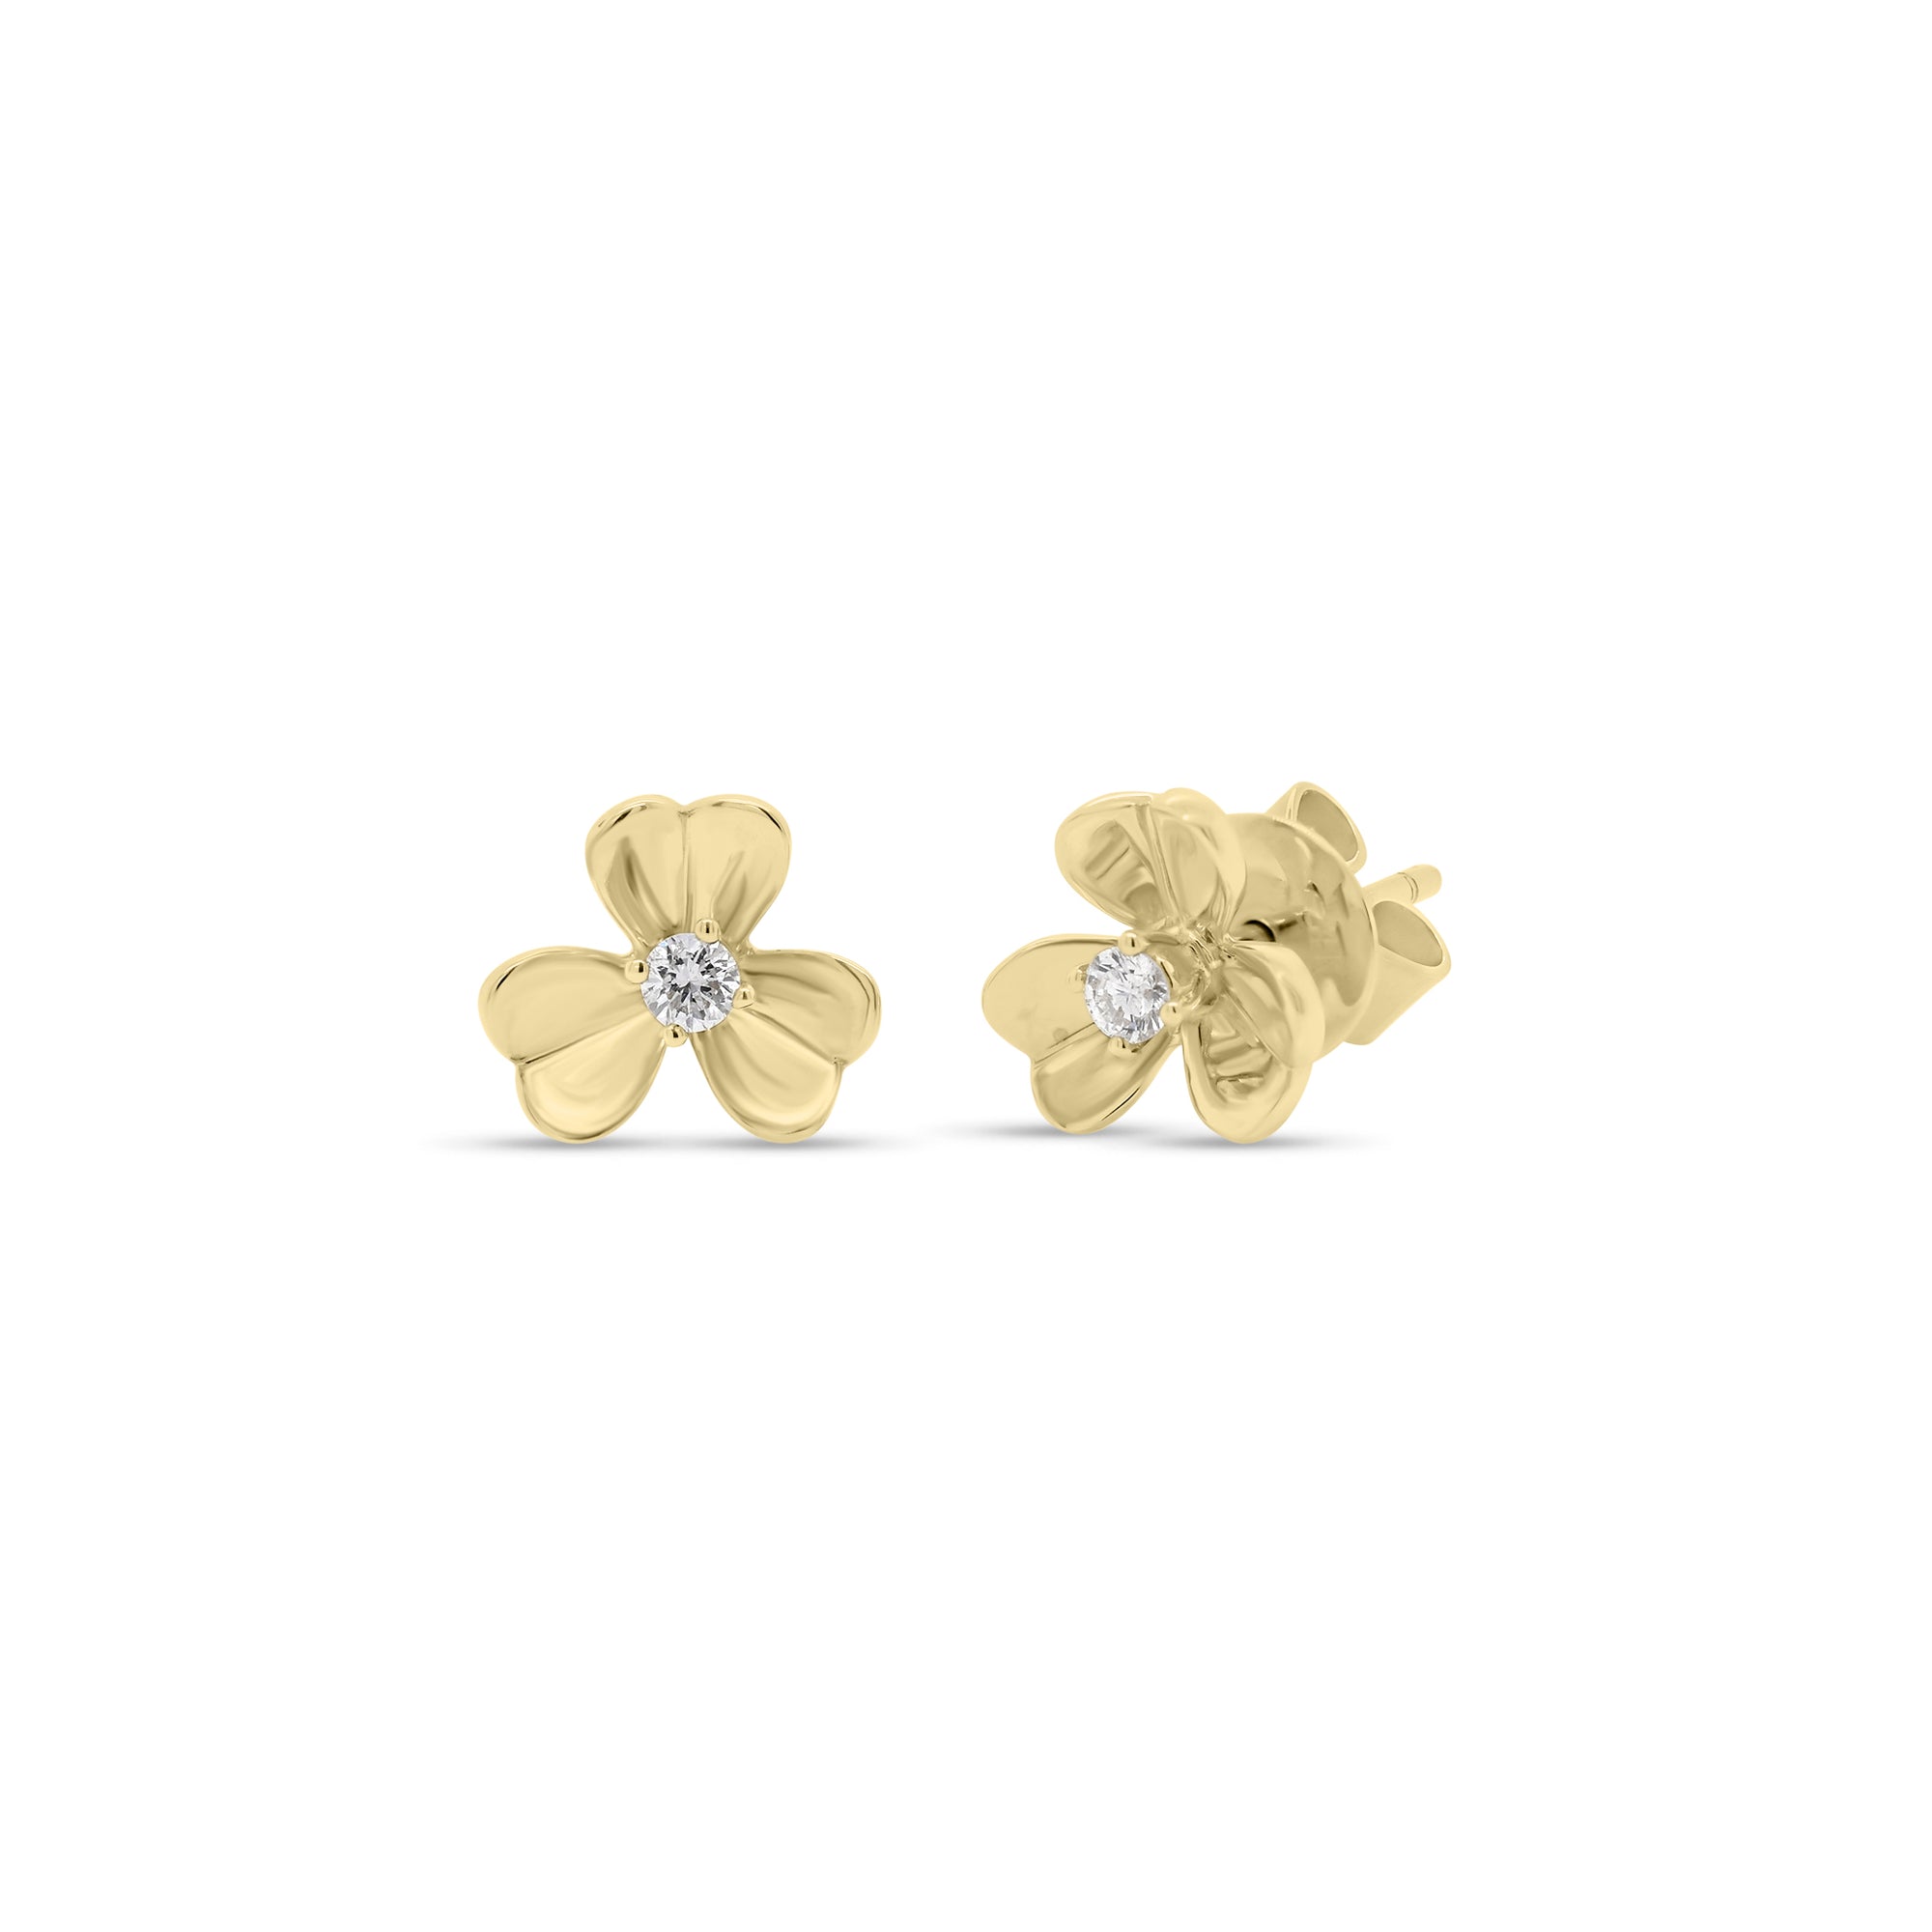 Diamond Accent Clover Stud Earrings - 14K yellow gold weighing 2.47 grams  - 2 round diamonds totaling 0.10 carats